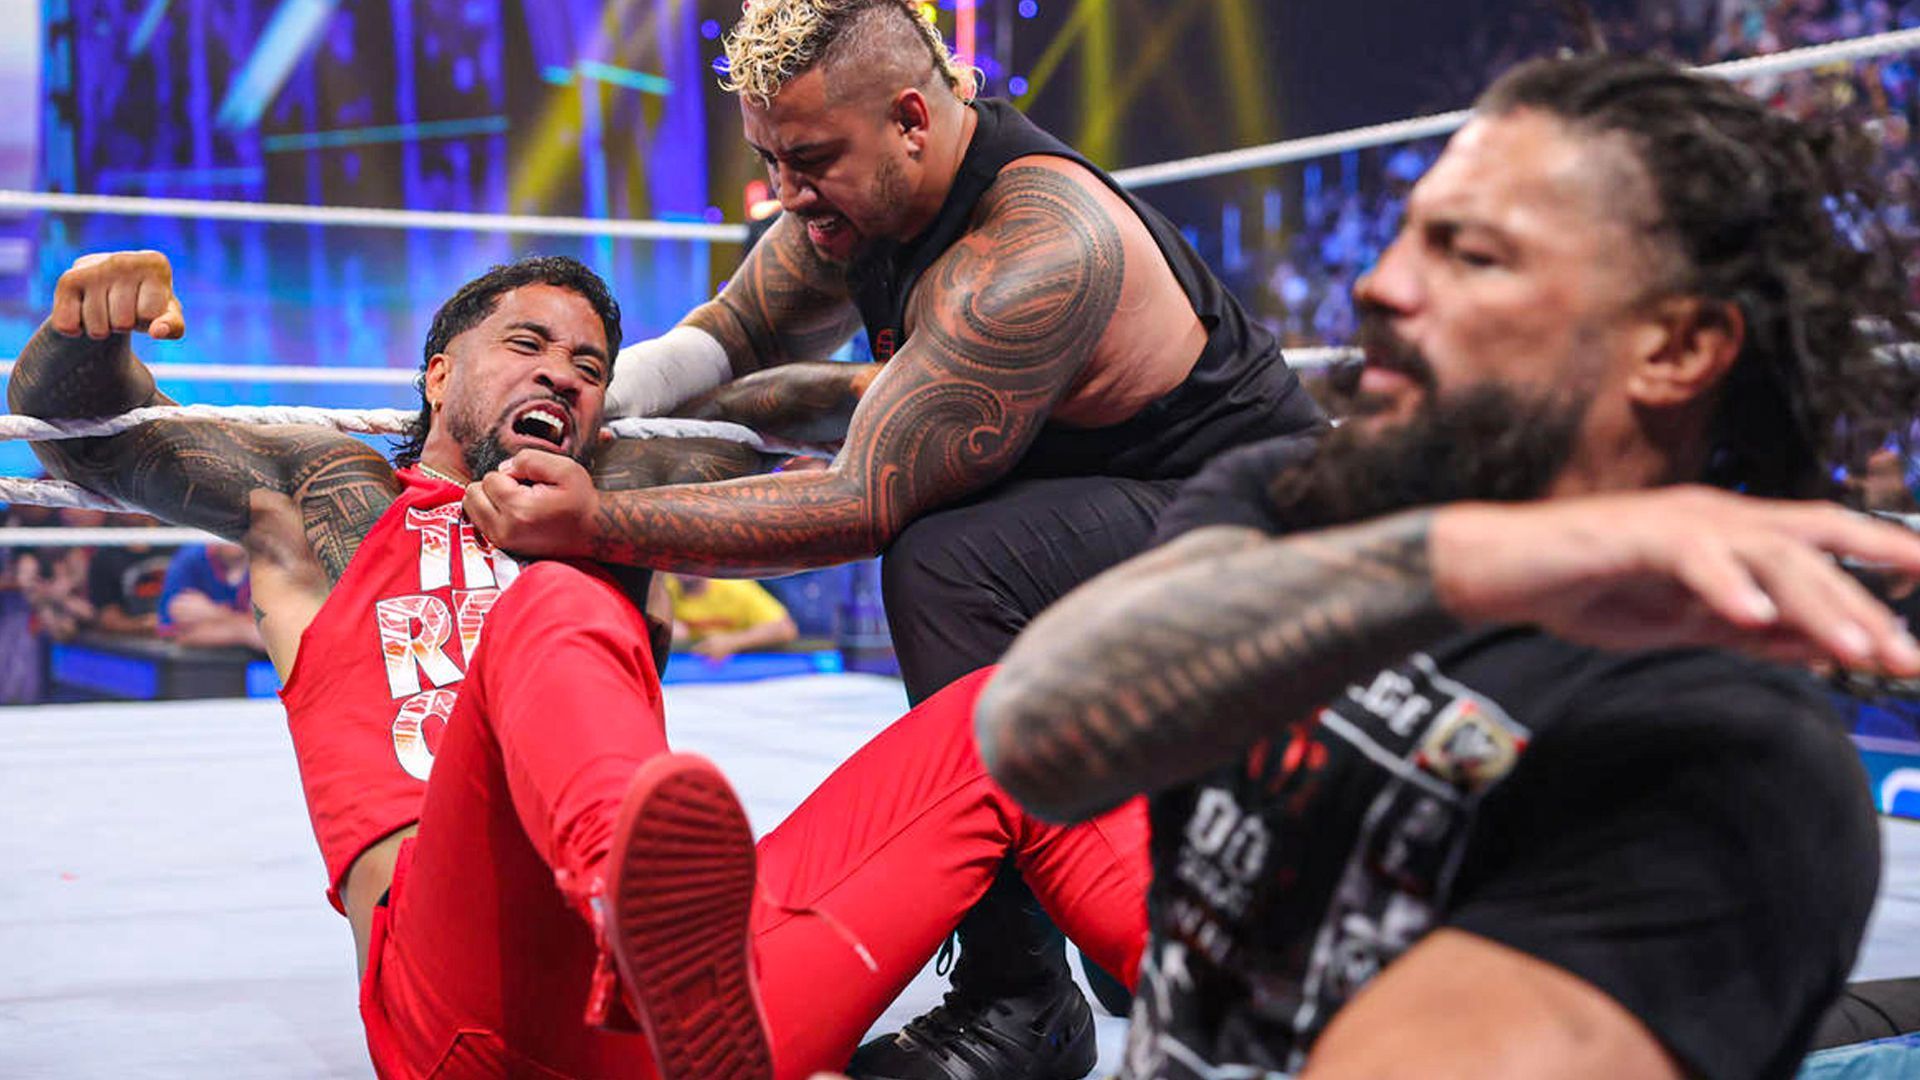 Solo and Reigns destroyed Usos on SmackDown.